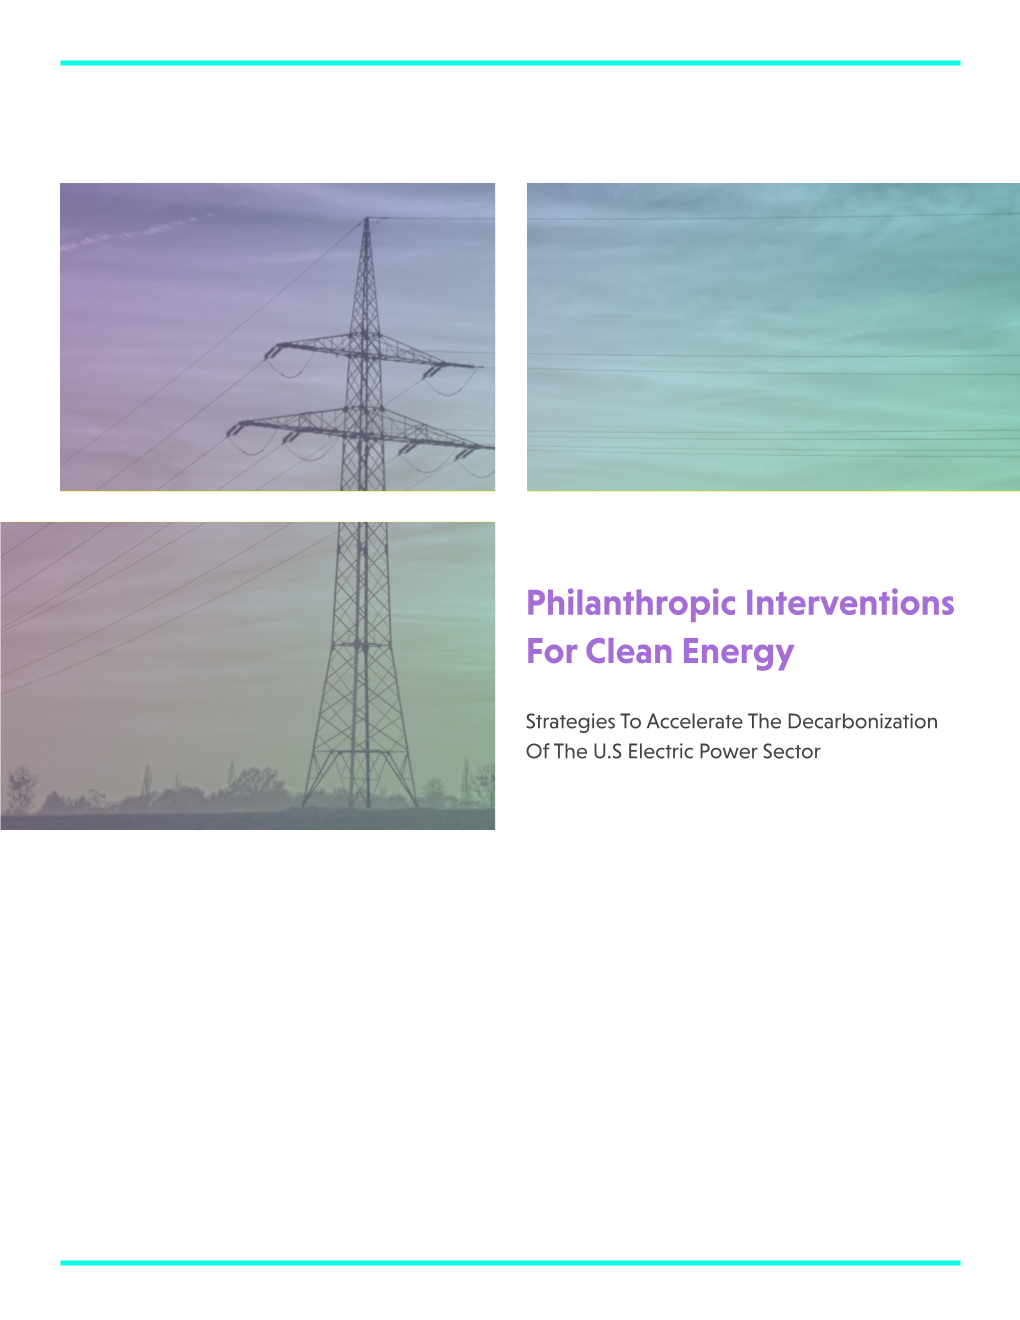 Philanthropic Interventions for Clean Energy